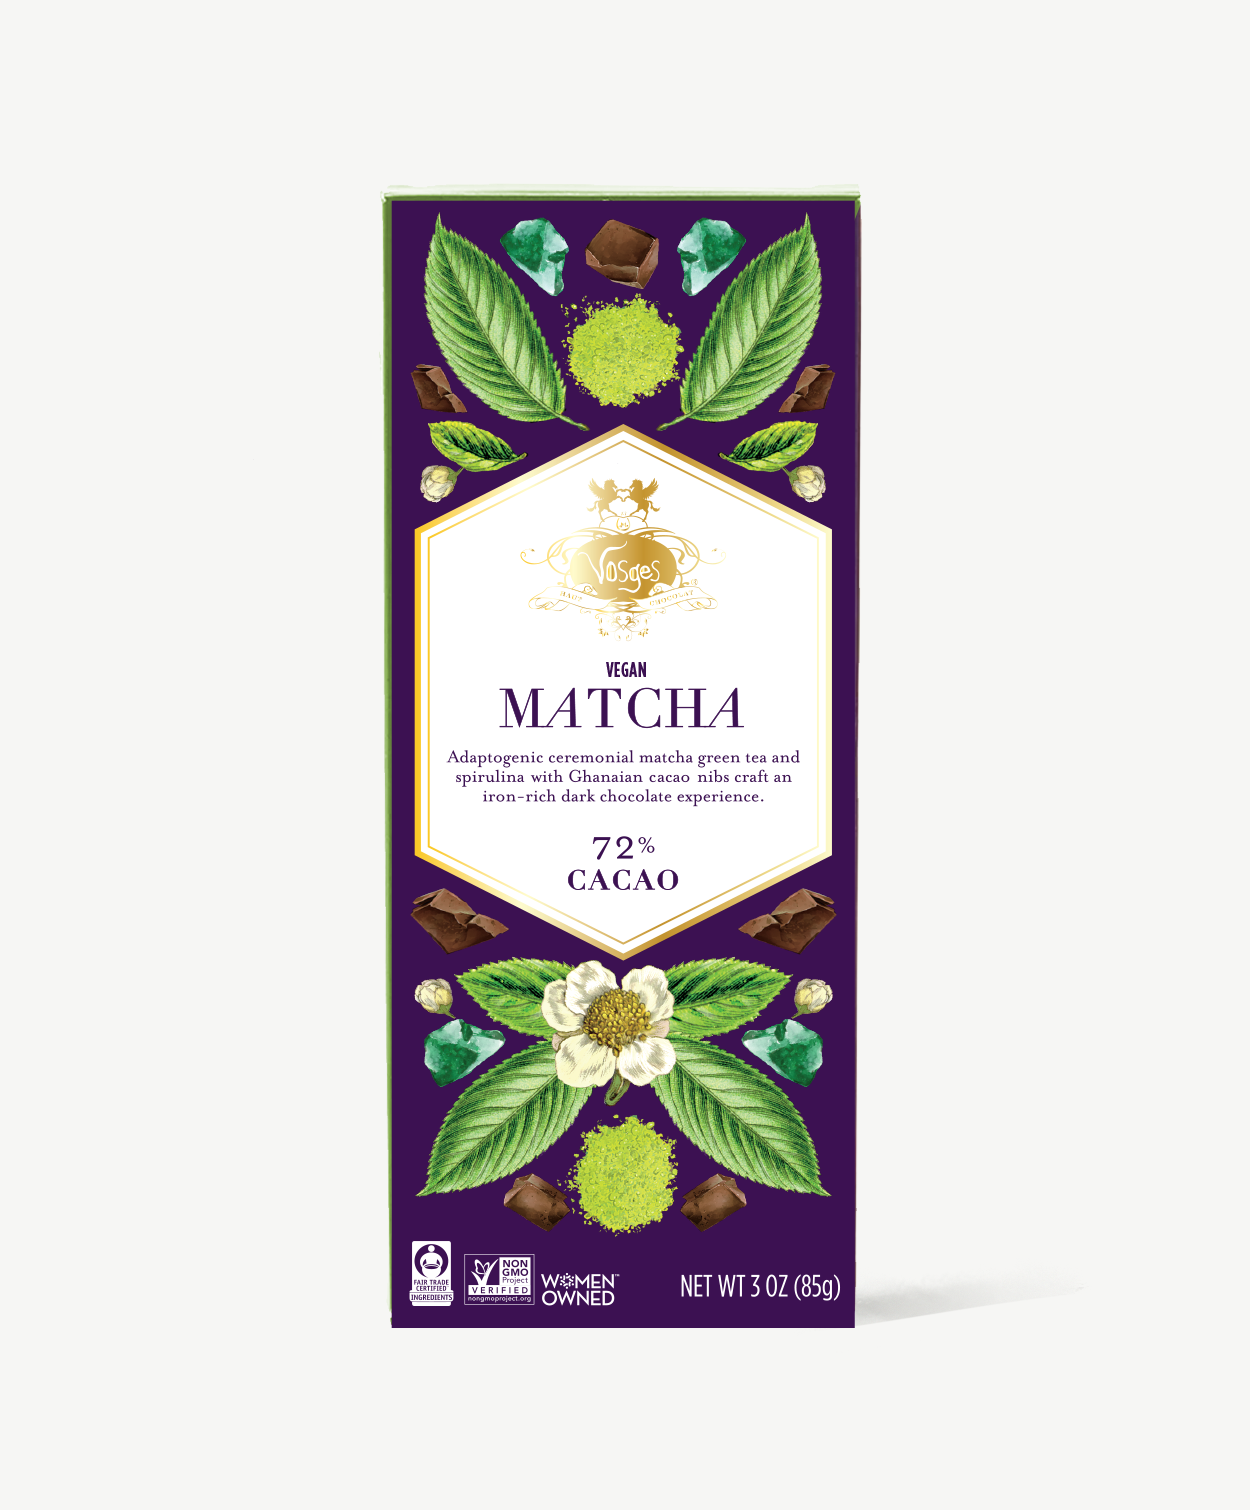 Vosges Matcha Chocolate bar stands upright displaying a purple box  featuring illustrations of tea leaves and flowers on a grey background.